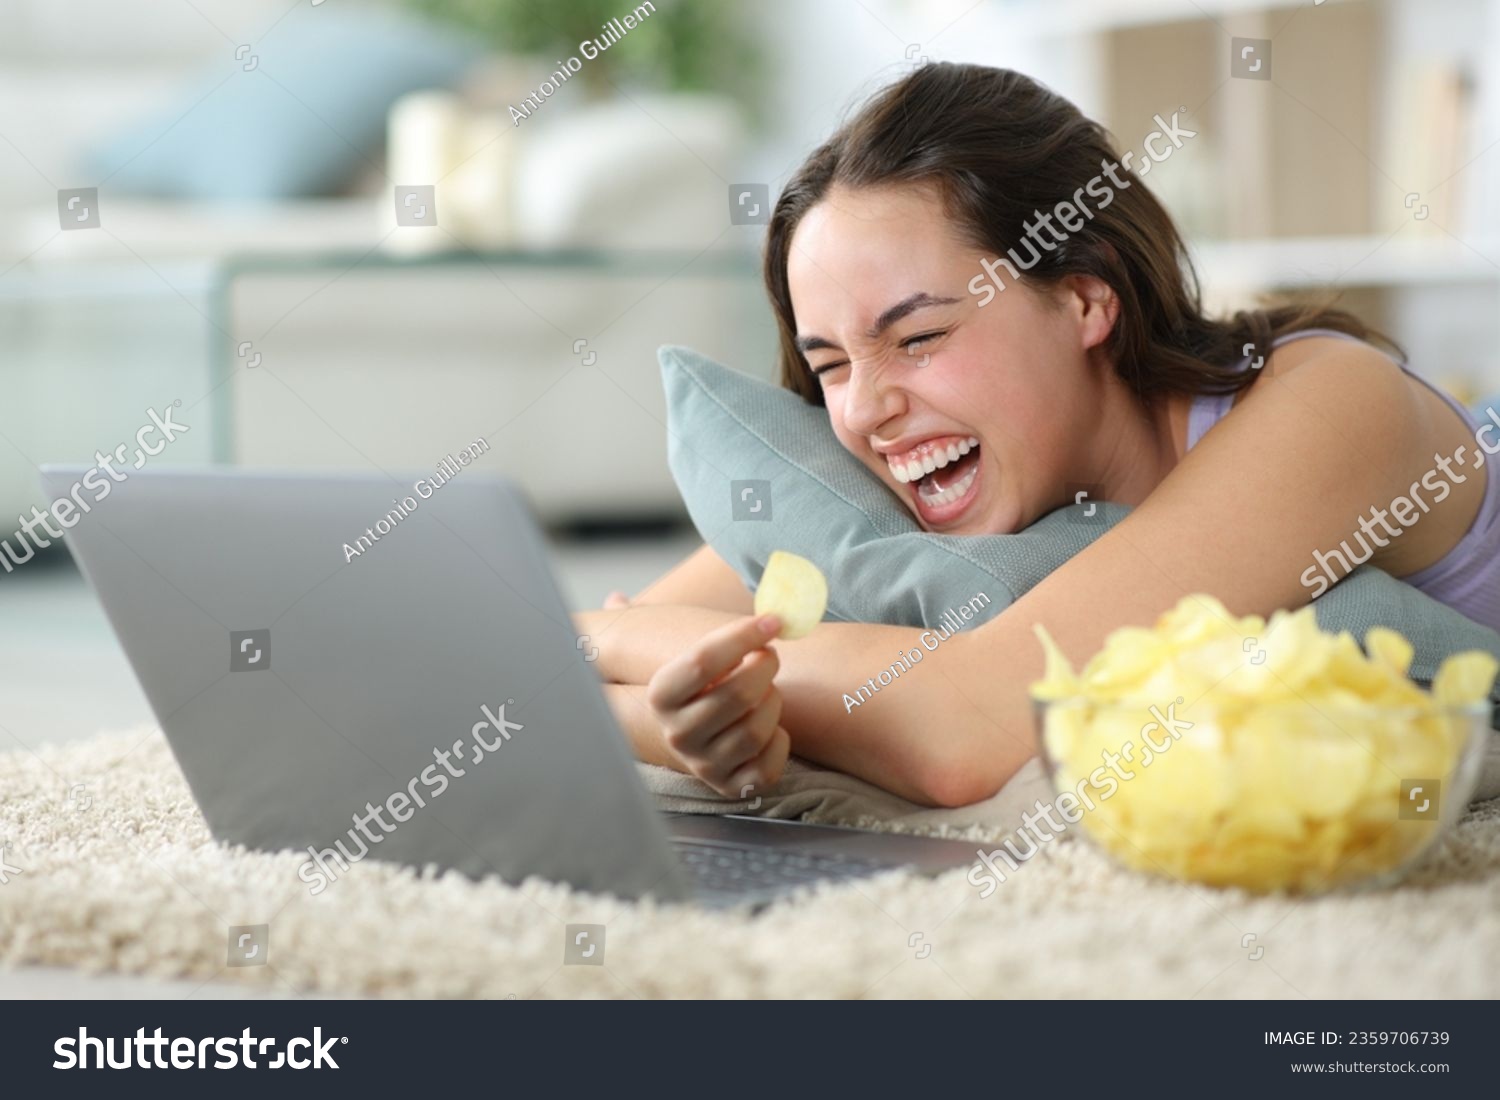 Funny woman eating potato chips watching media on laptop lying on the floor laughing hilariously at home #2359706739